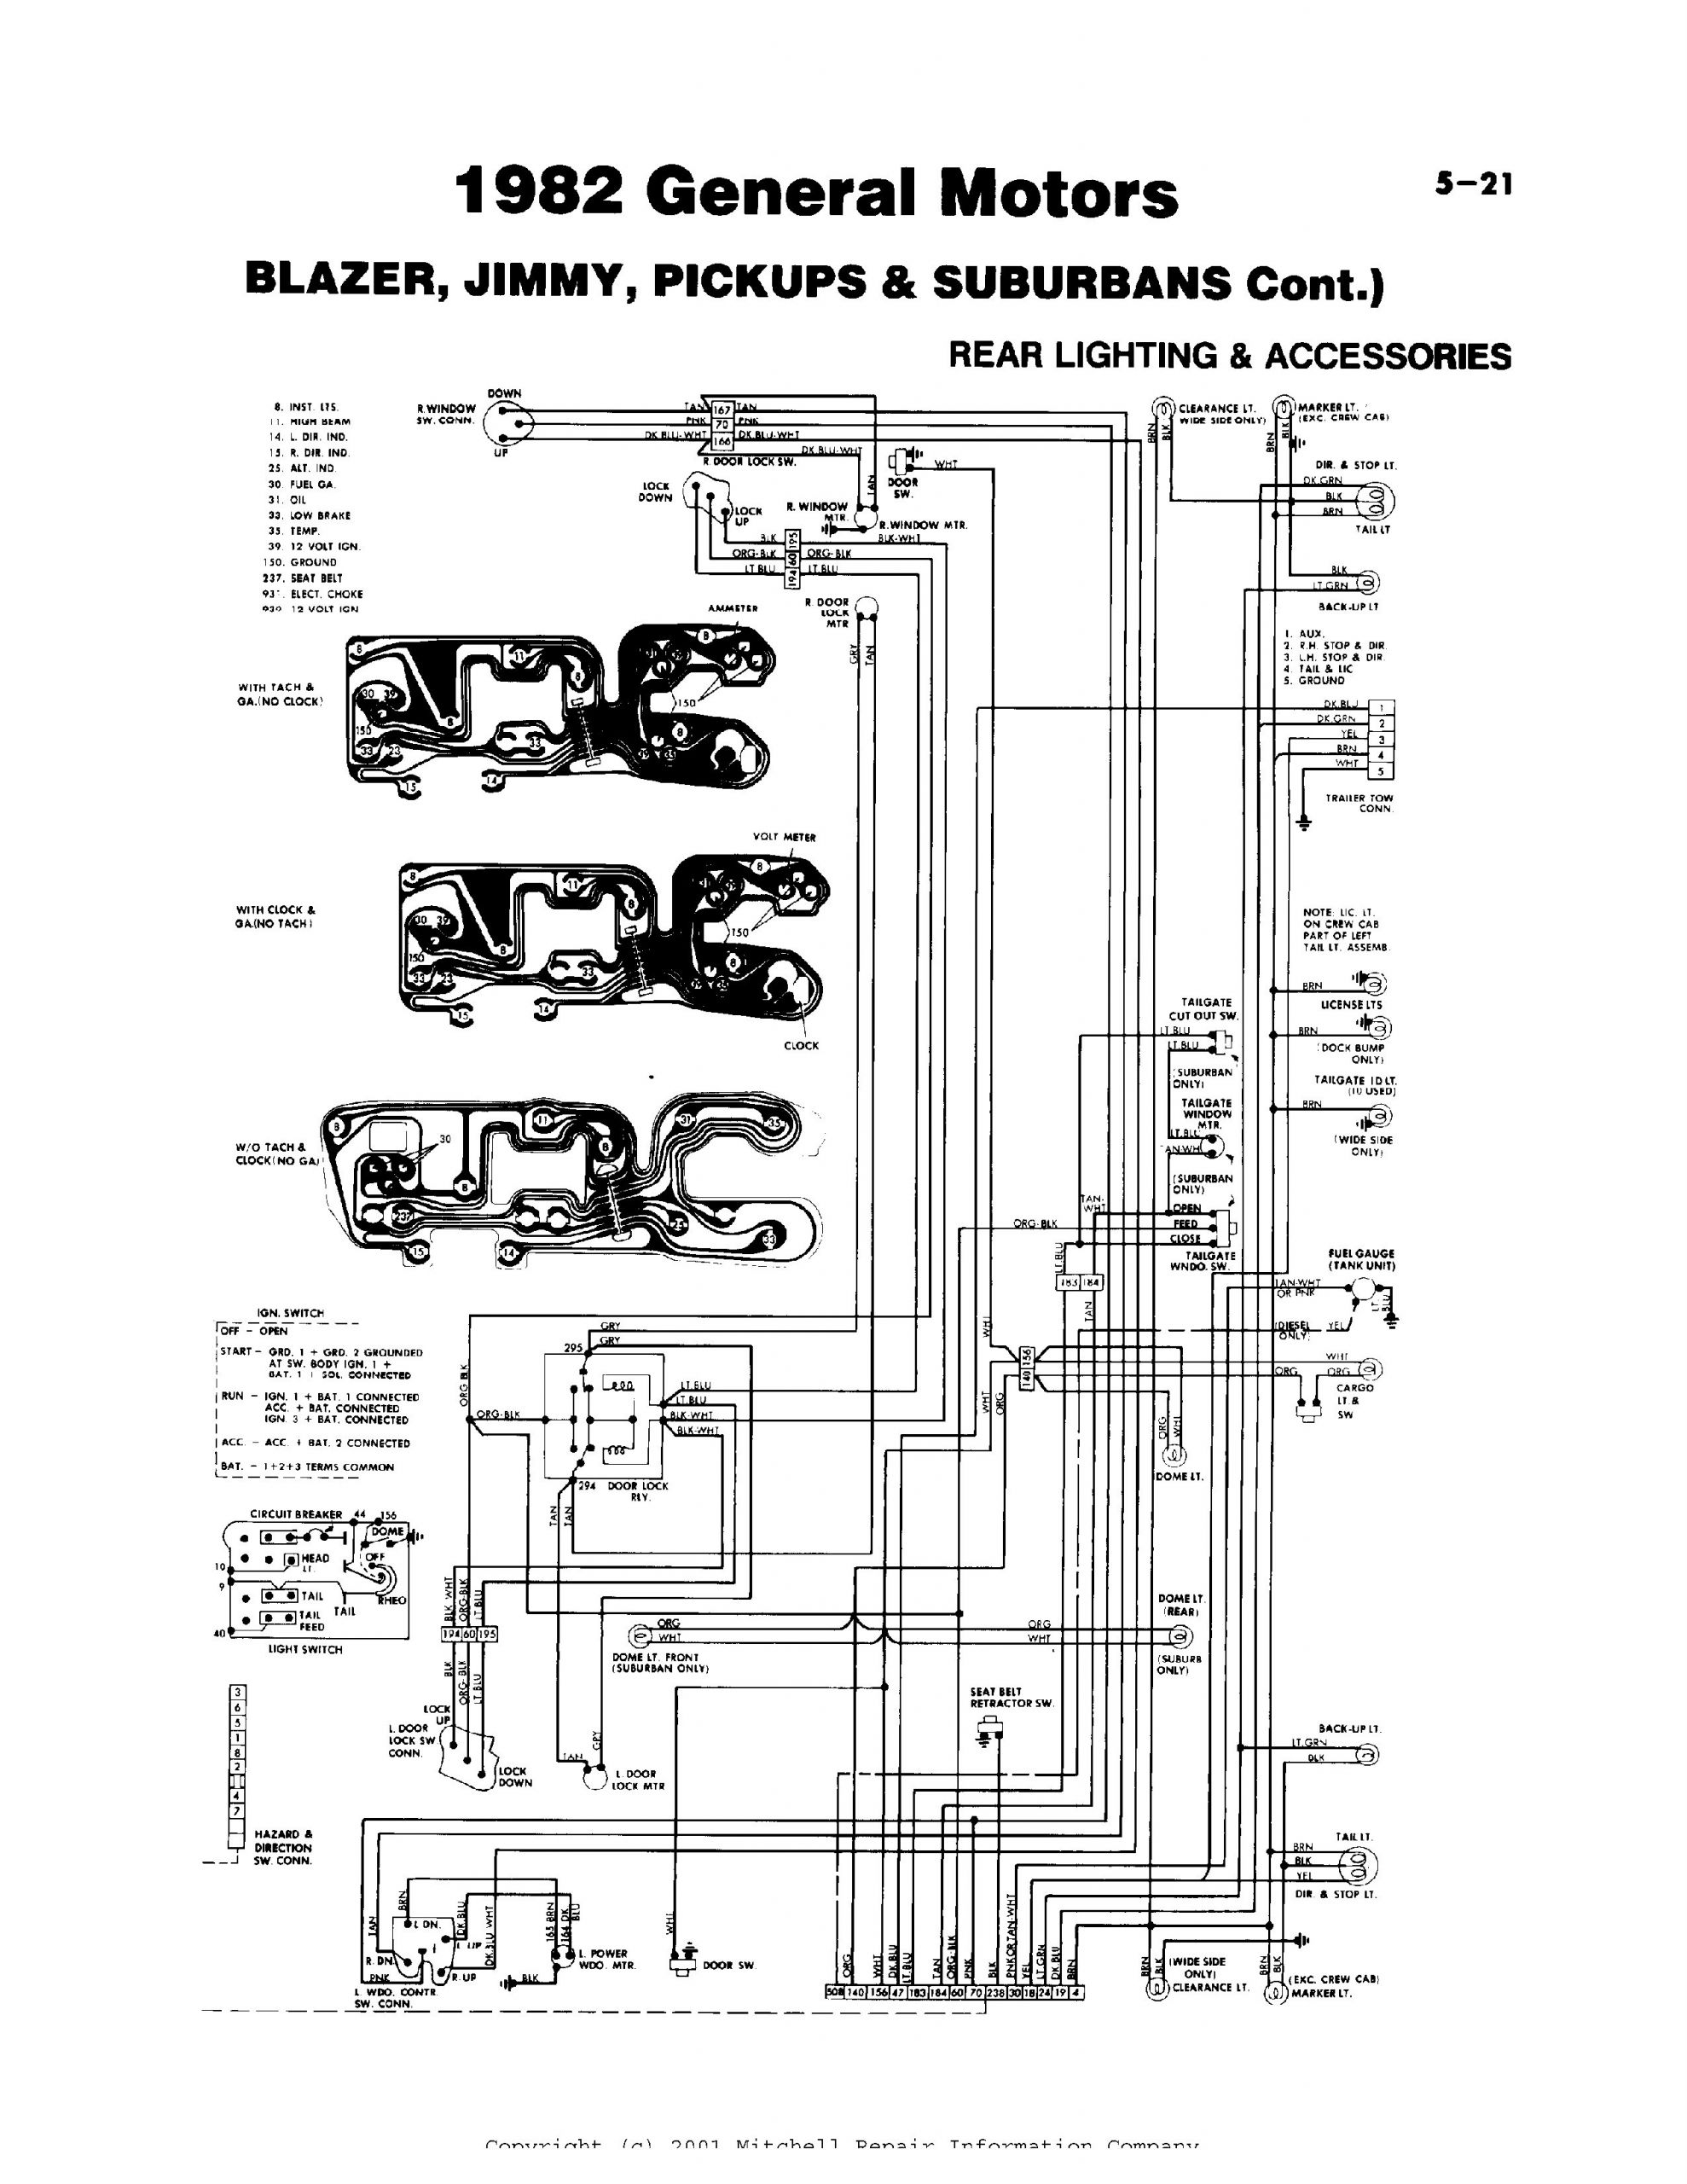 Wiring Diagram On A 1982 Shevy Truck Radeo Need Wiring Schematic for A 305 Chevy Truck 1982 Of Wiring Diagram On A 1982 Shevy Truck Radeo